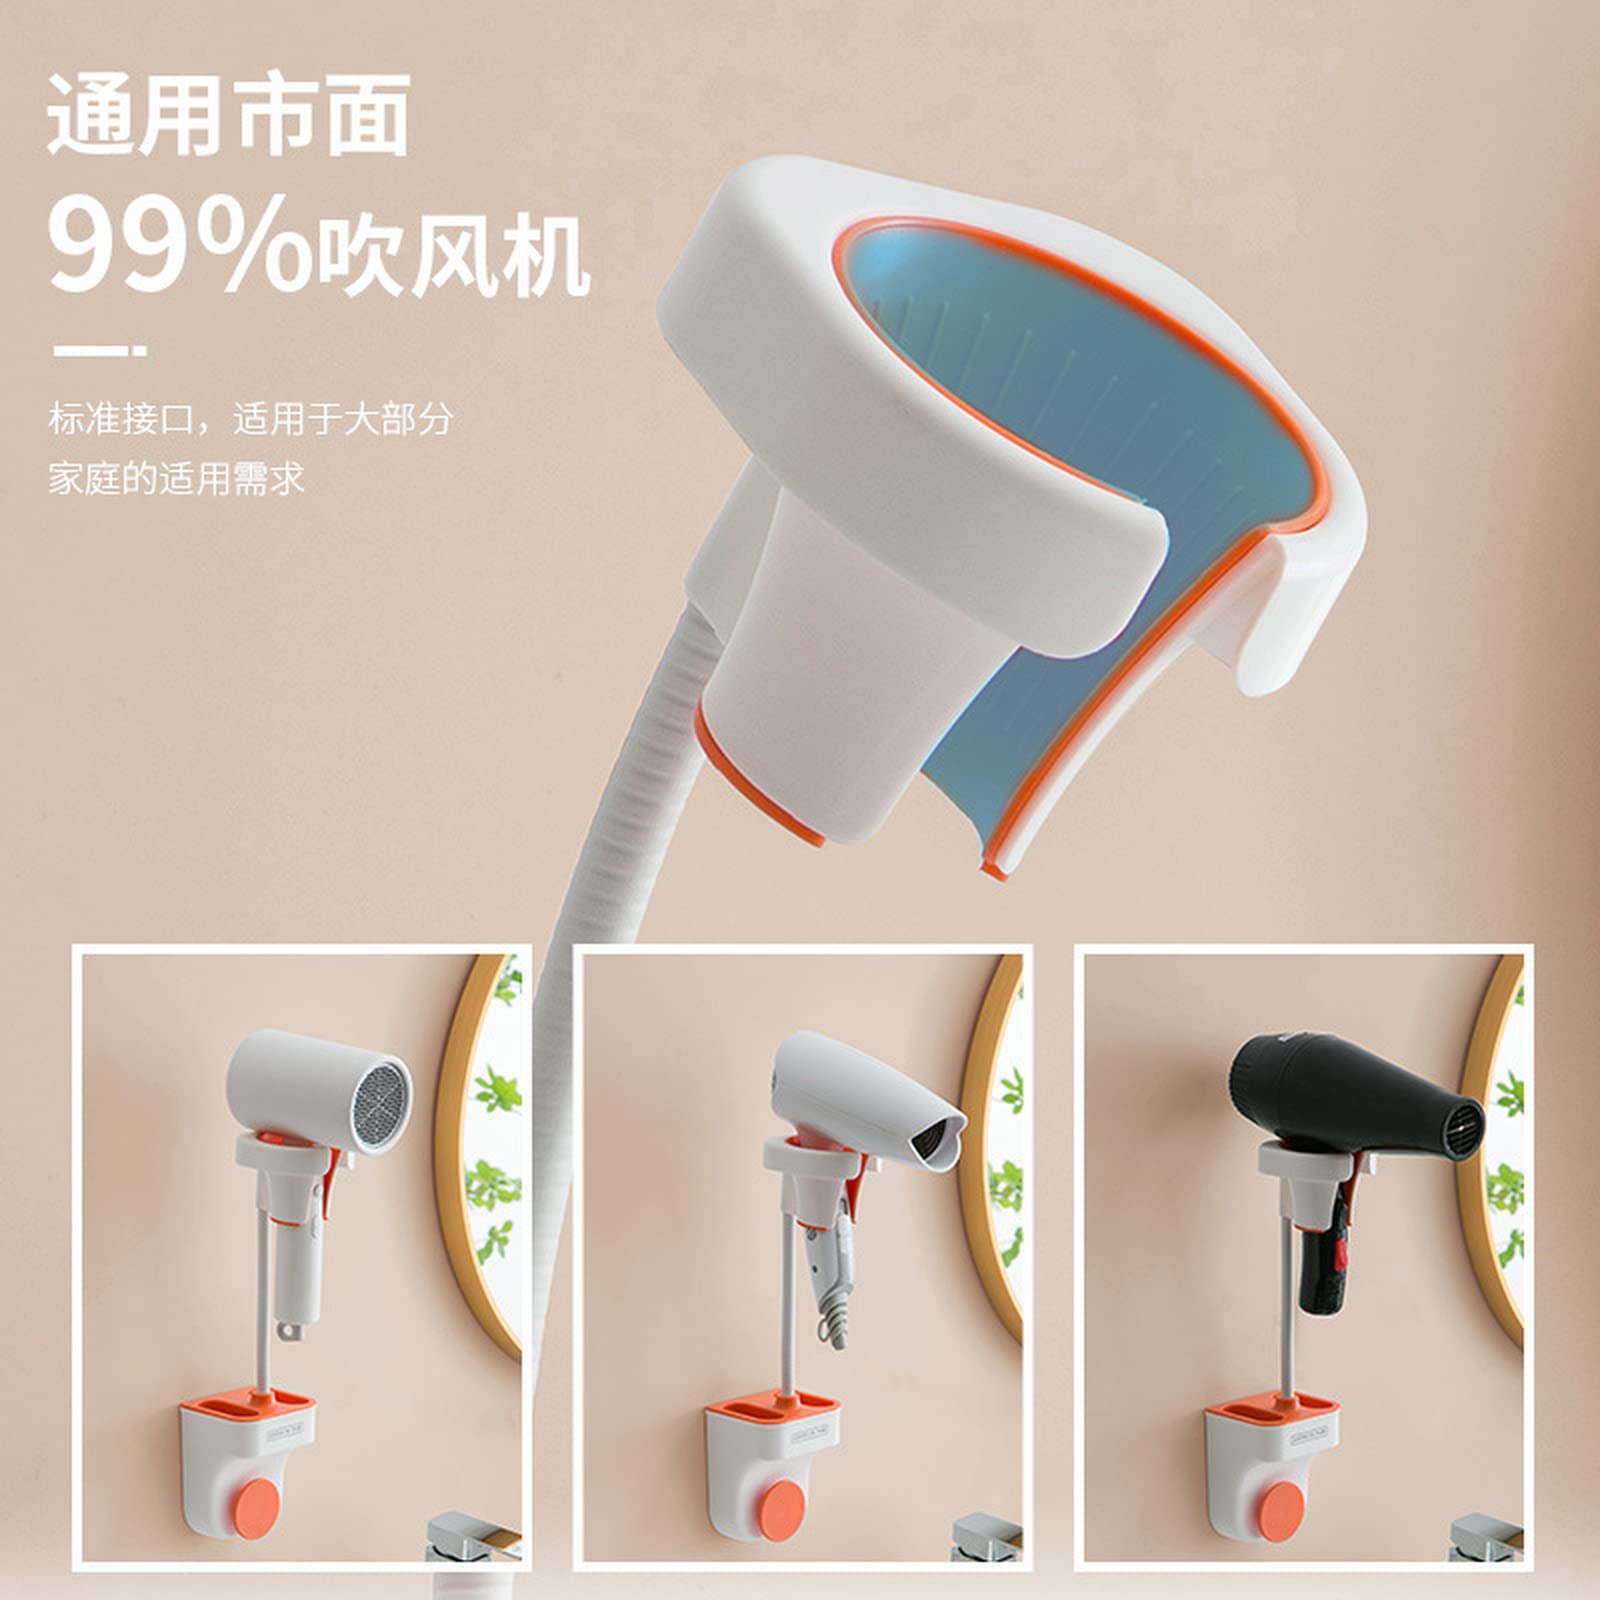 Hair Dryer Stand, Adjustable Lazy Hands Free Hair Dryer Shelf, Wall Mounted Hole Free Hair Dryer Rack